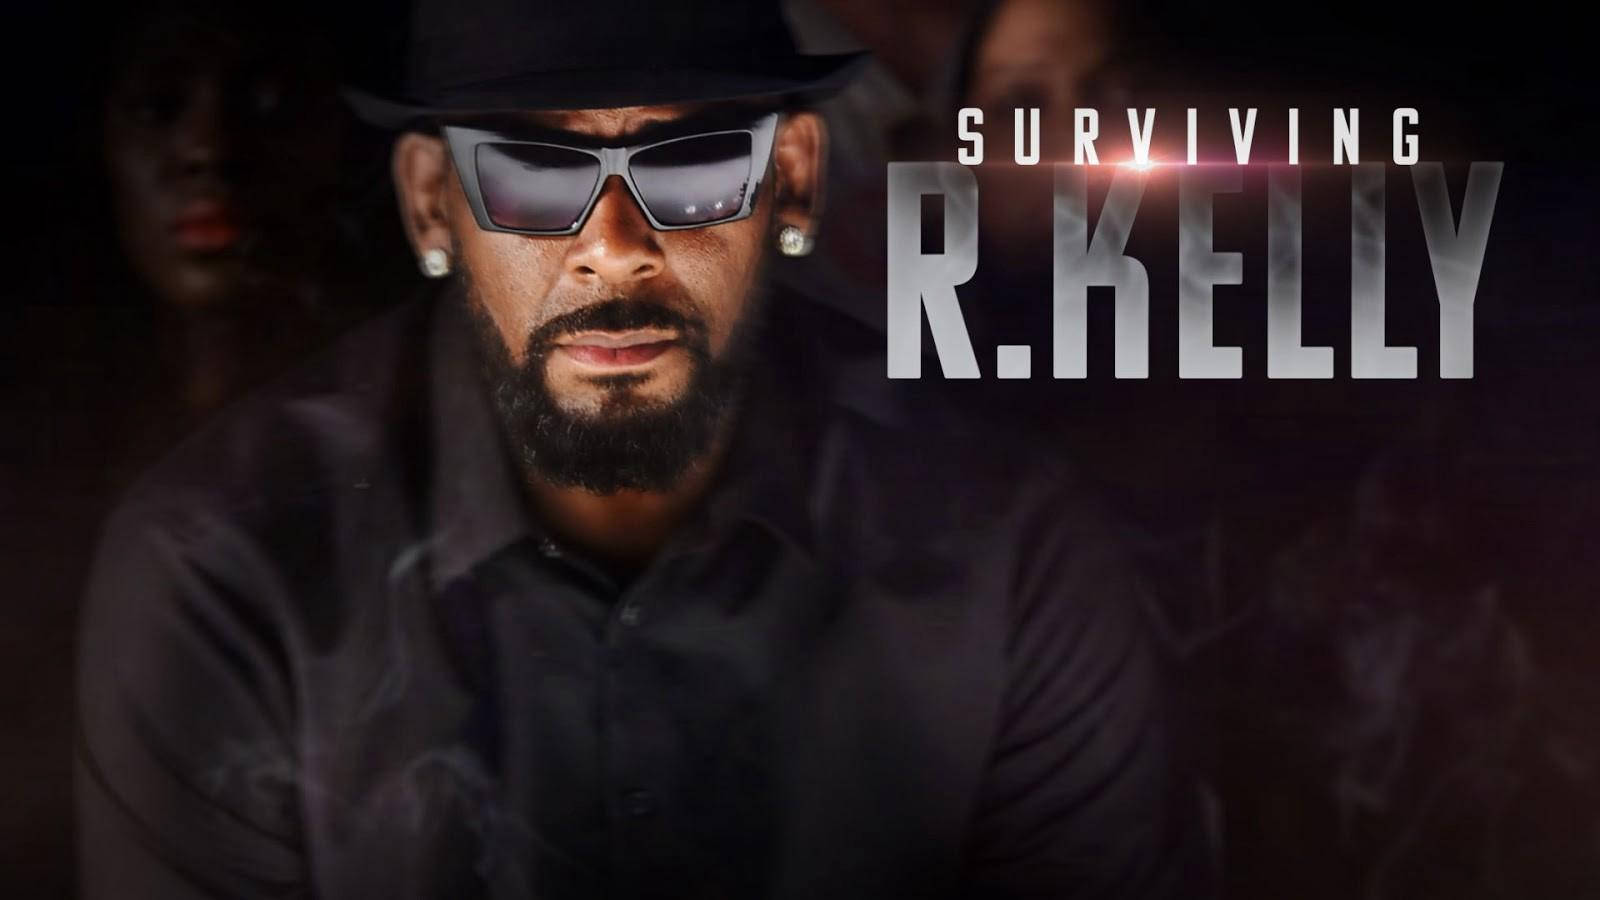 R Kelly Surviving Album Cover Background